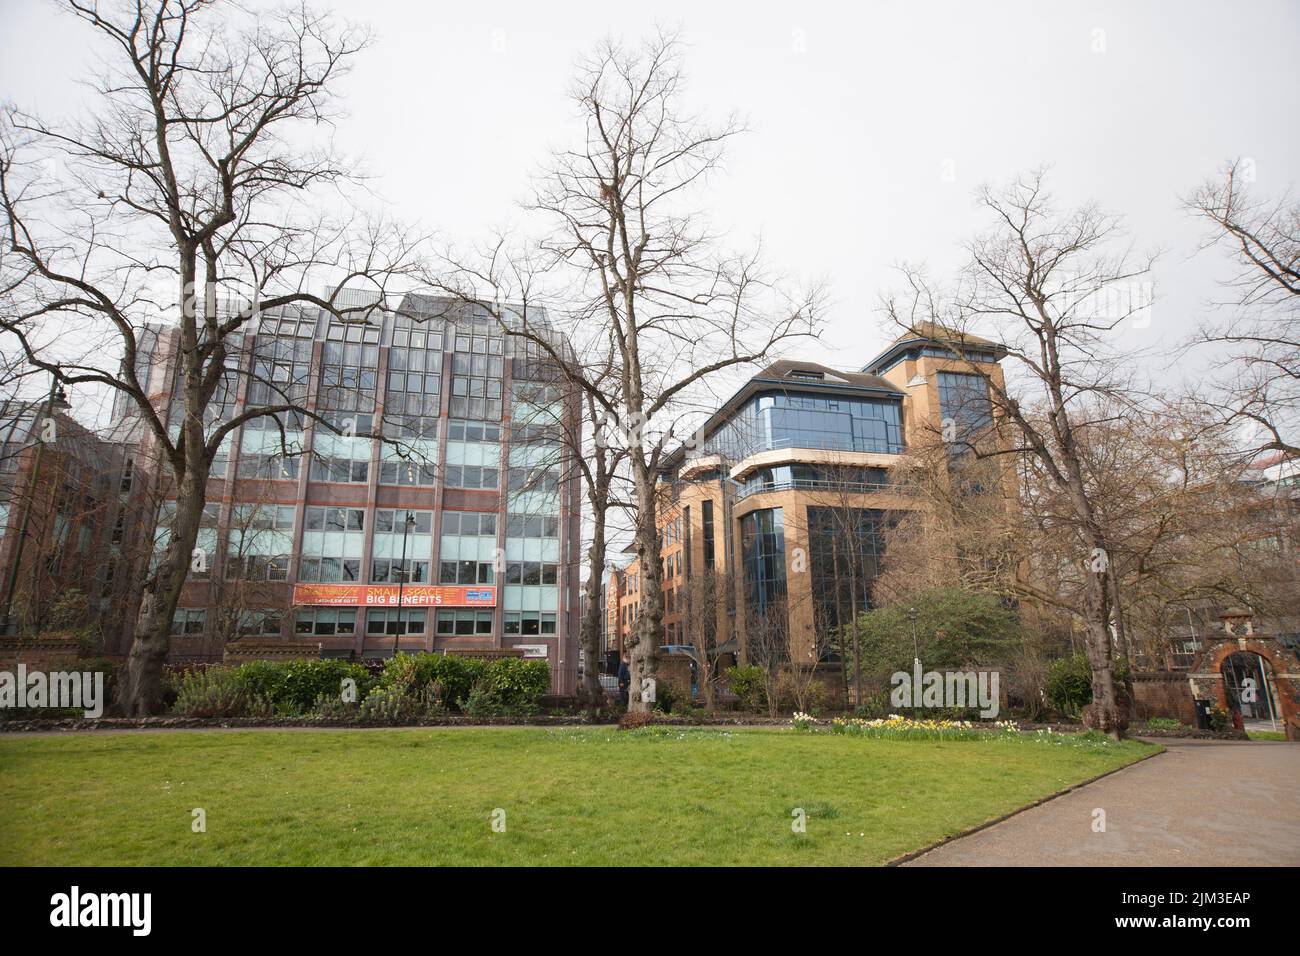 Buildings by Forbury Park in Reading, Berkshire in the UK Stock Photo